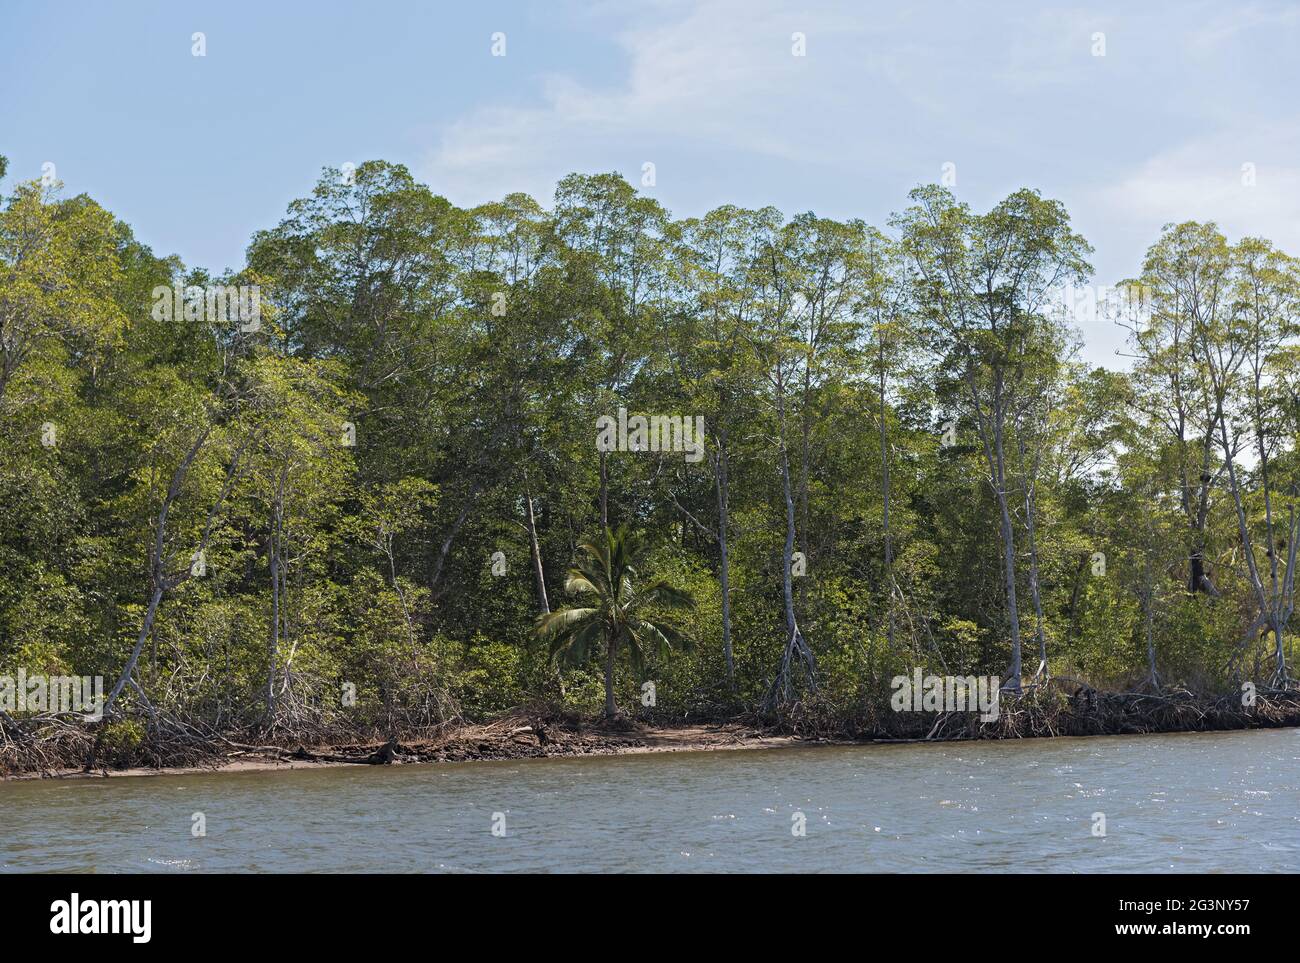 Mangrove forest on the shores of the Bahia de los Muertos at the mouth of the Rio Platanal Panama Stock Photo